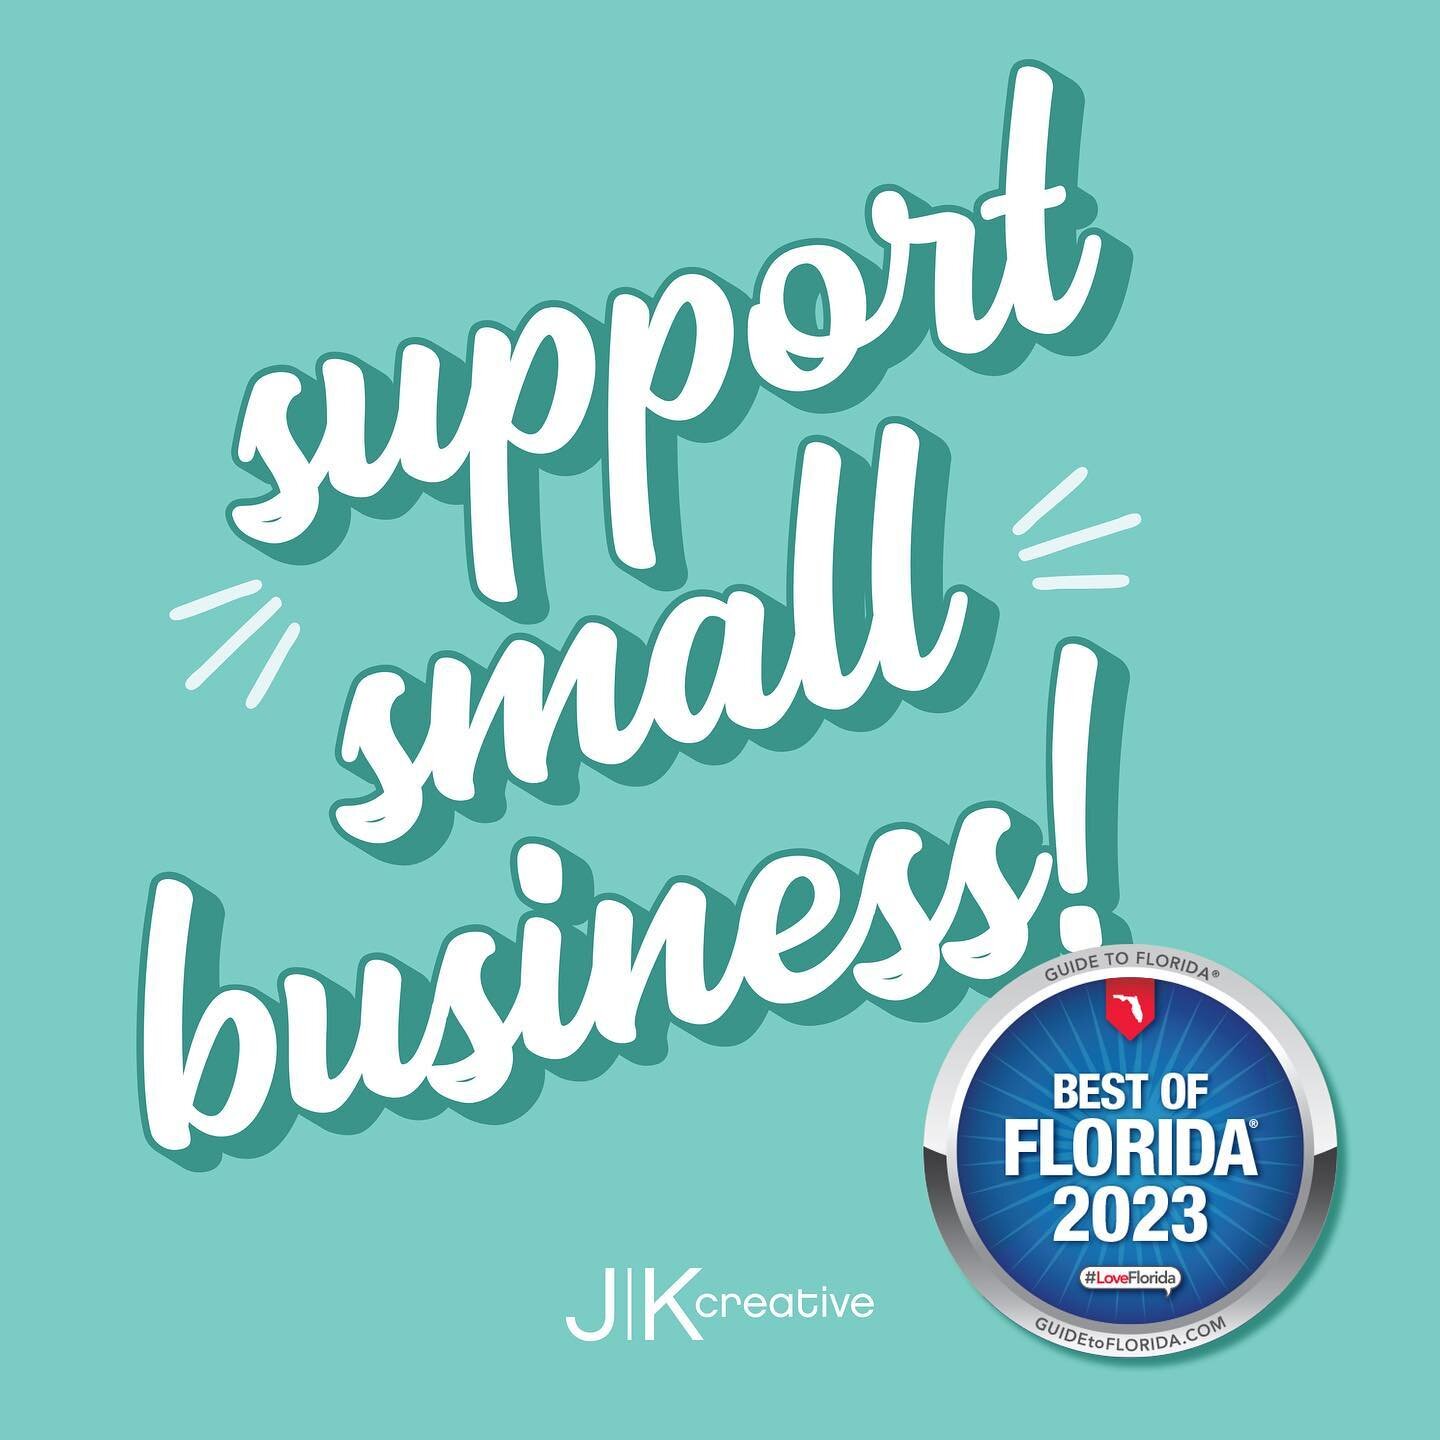 It's #NationalSmallBusinessDay! Help us celebrate by casting your vote for our &quot;Best of Florida&quot; nomination!

VOTE NOW: Head over to guidetoflorida.com, and vote for us under business &amp; creative services. We are nominated under graphic 